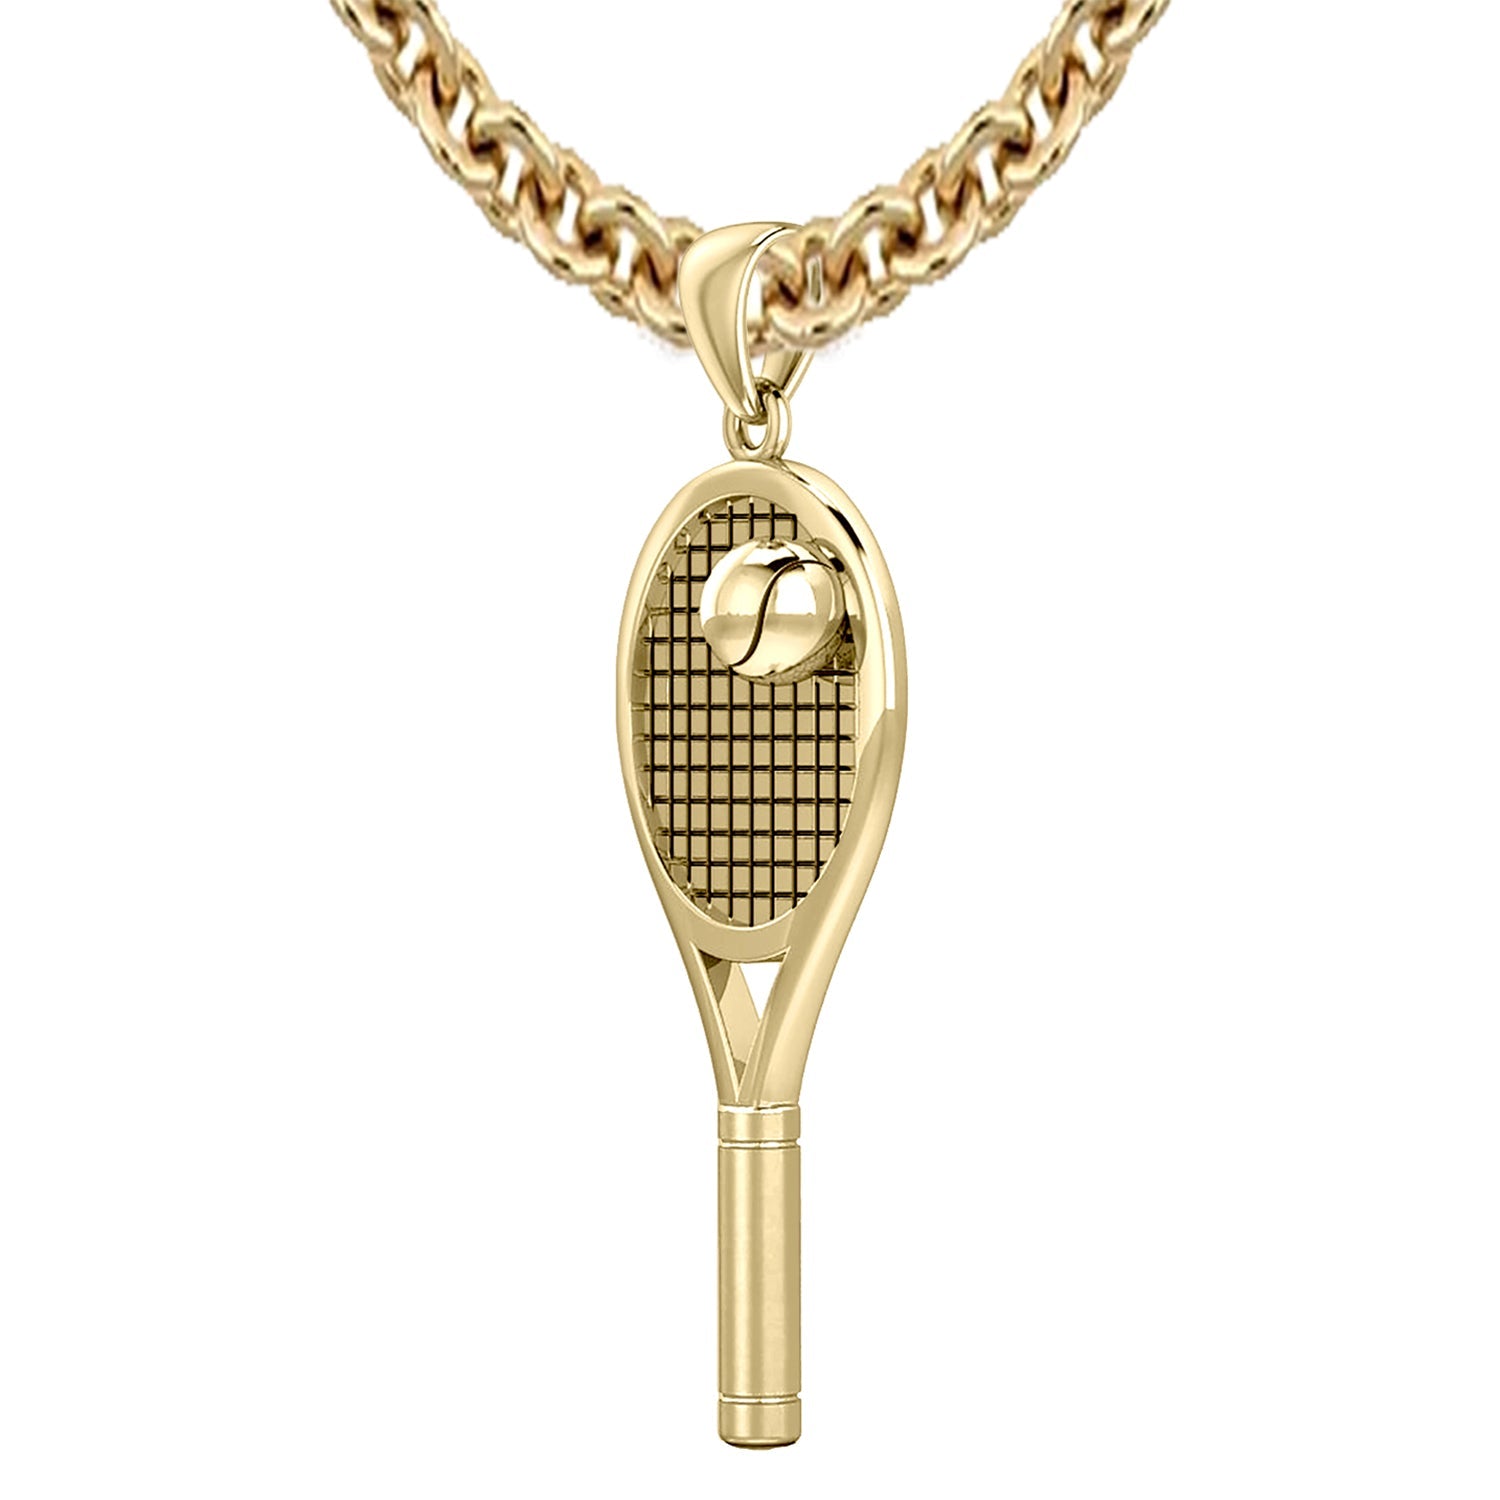 TABLE TENNIS RACKET PENDANT NECKLACE IN ROSE GOLD - Gold Purity